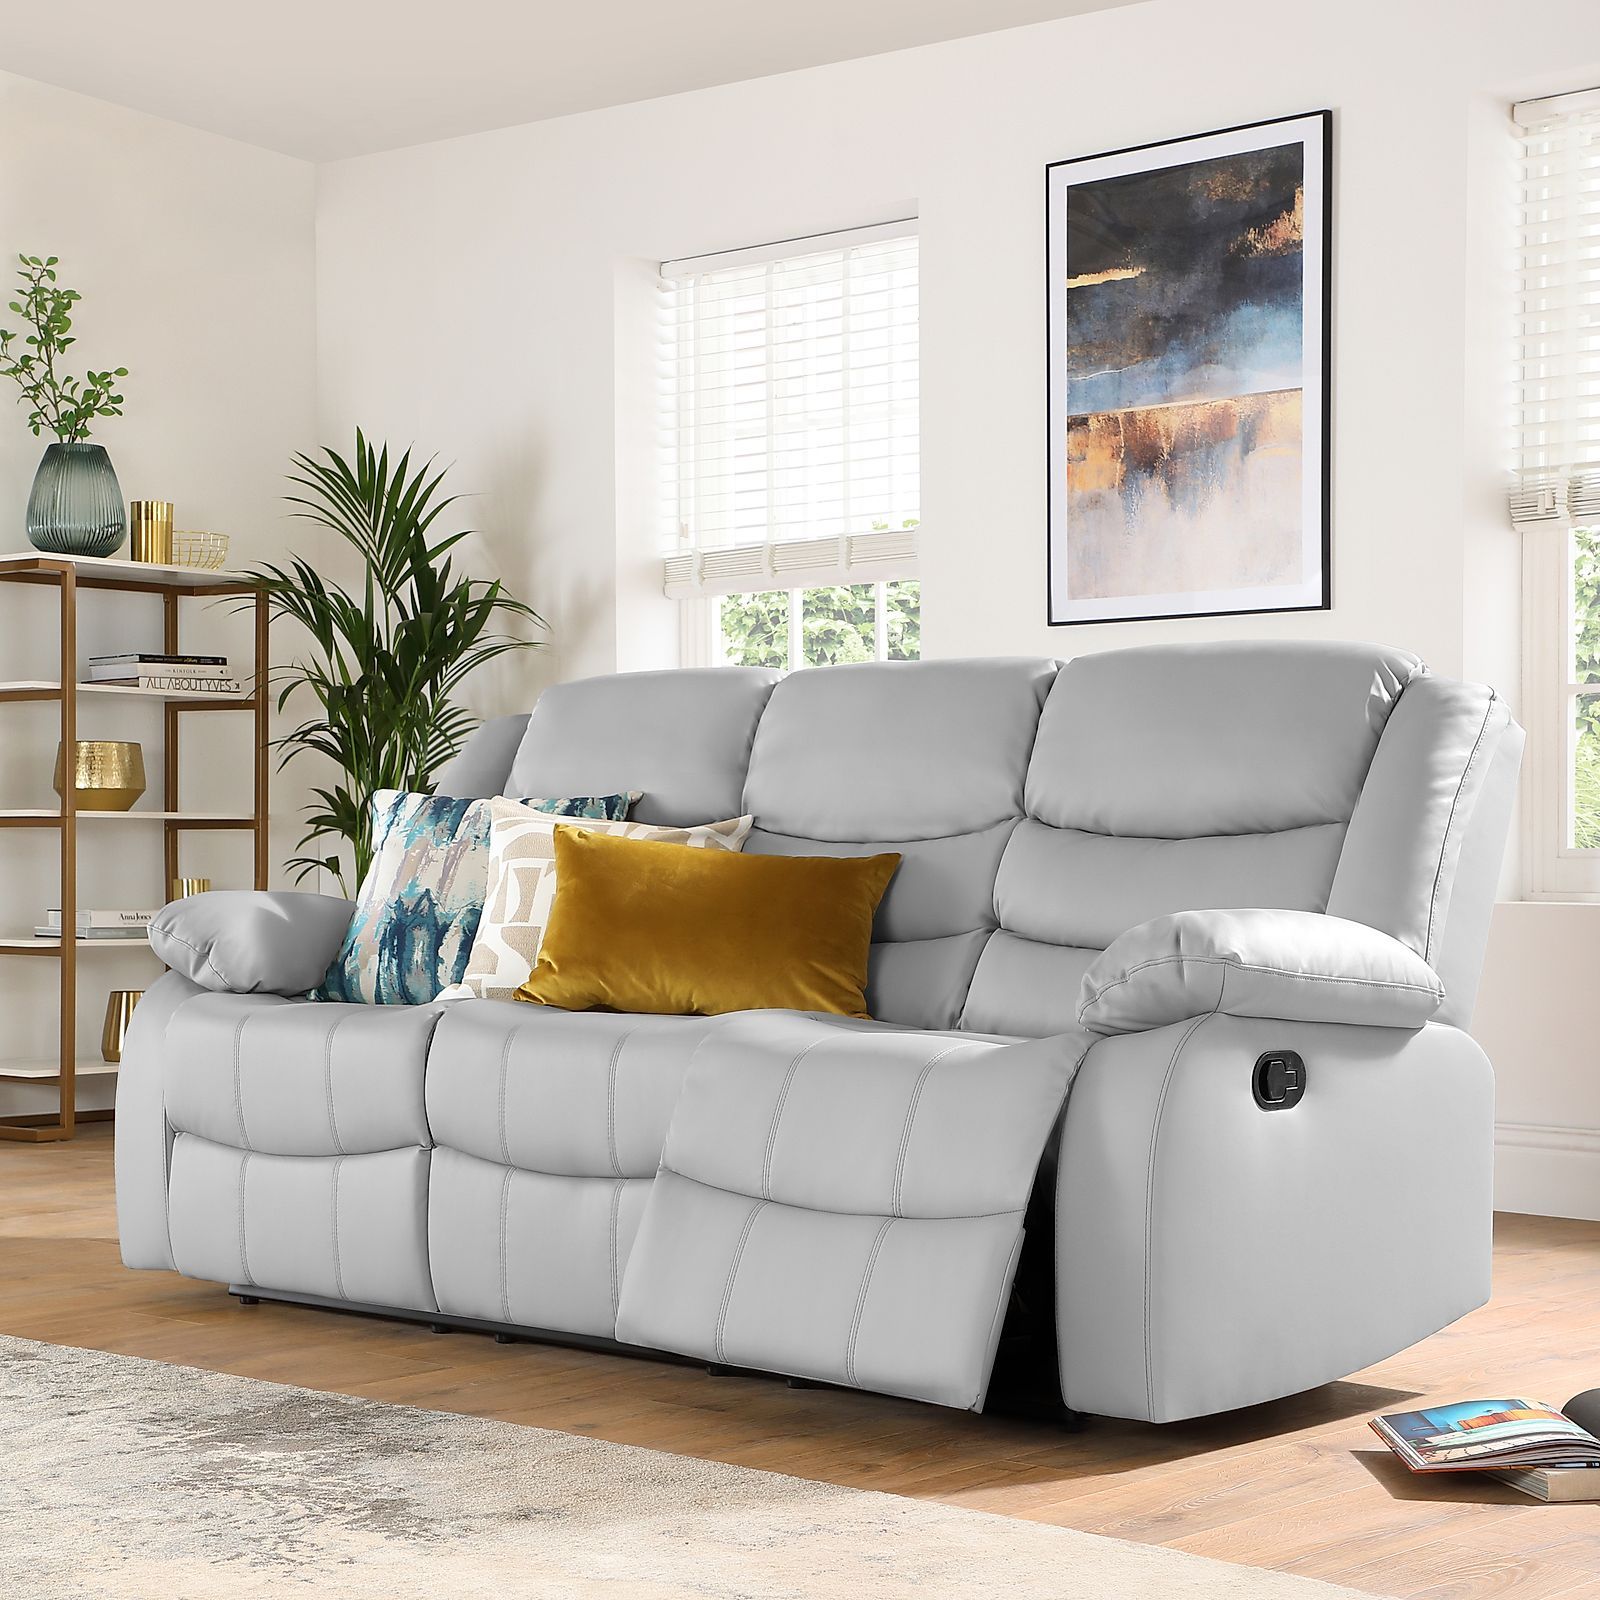 Sorrento Light Grey Leather 3 Seater Recliner Sofa | Furniture Choice For Sofas In Light Gray (View 12 of 22)